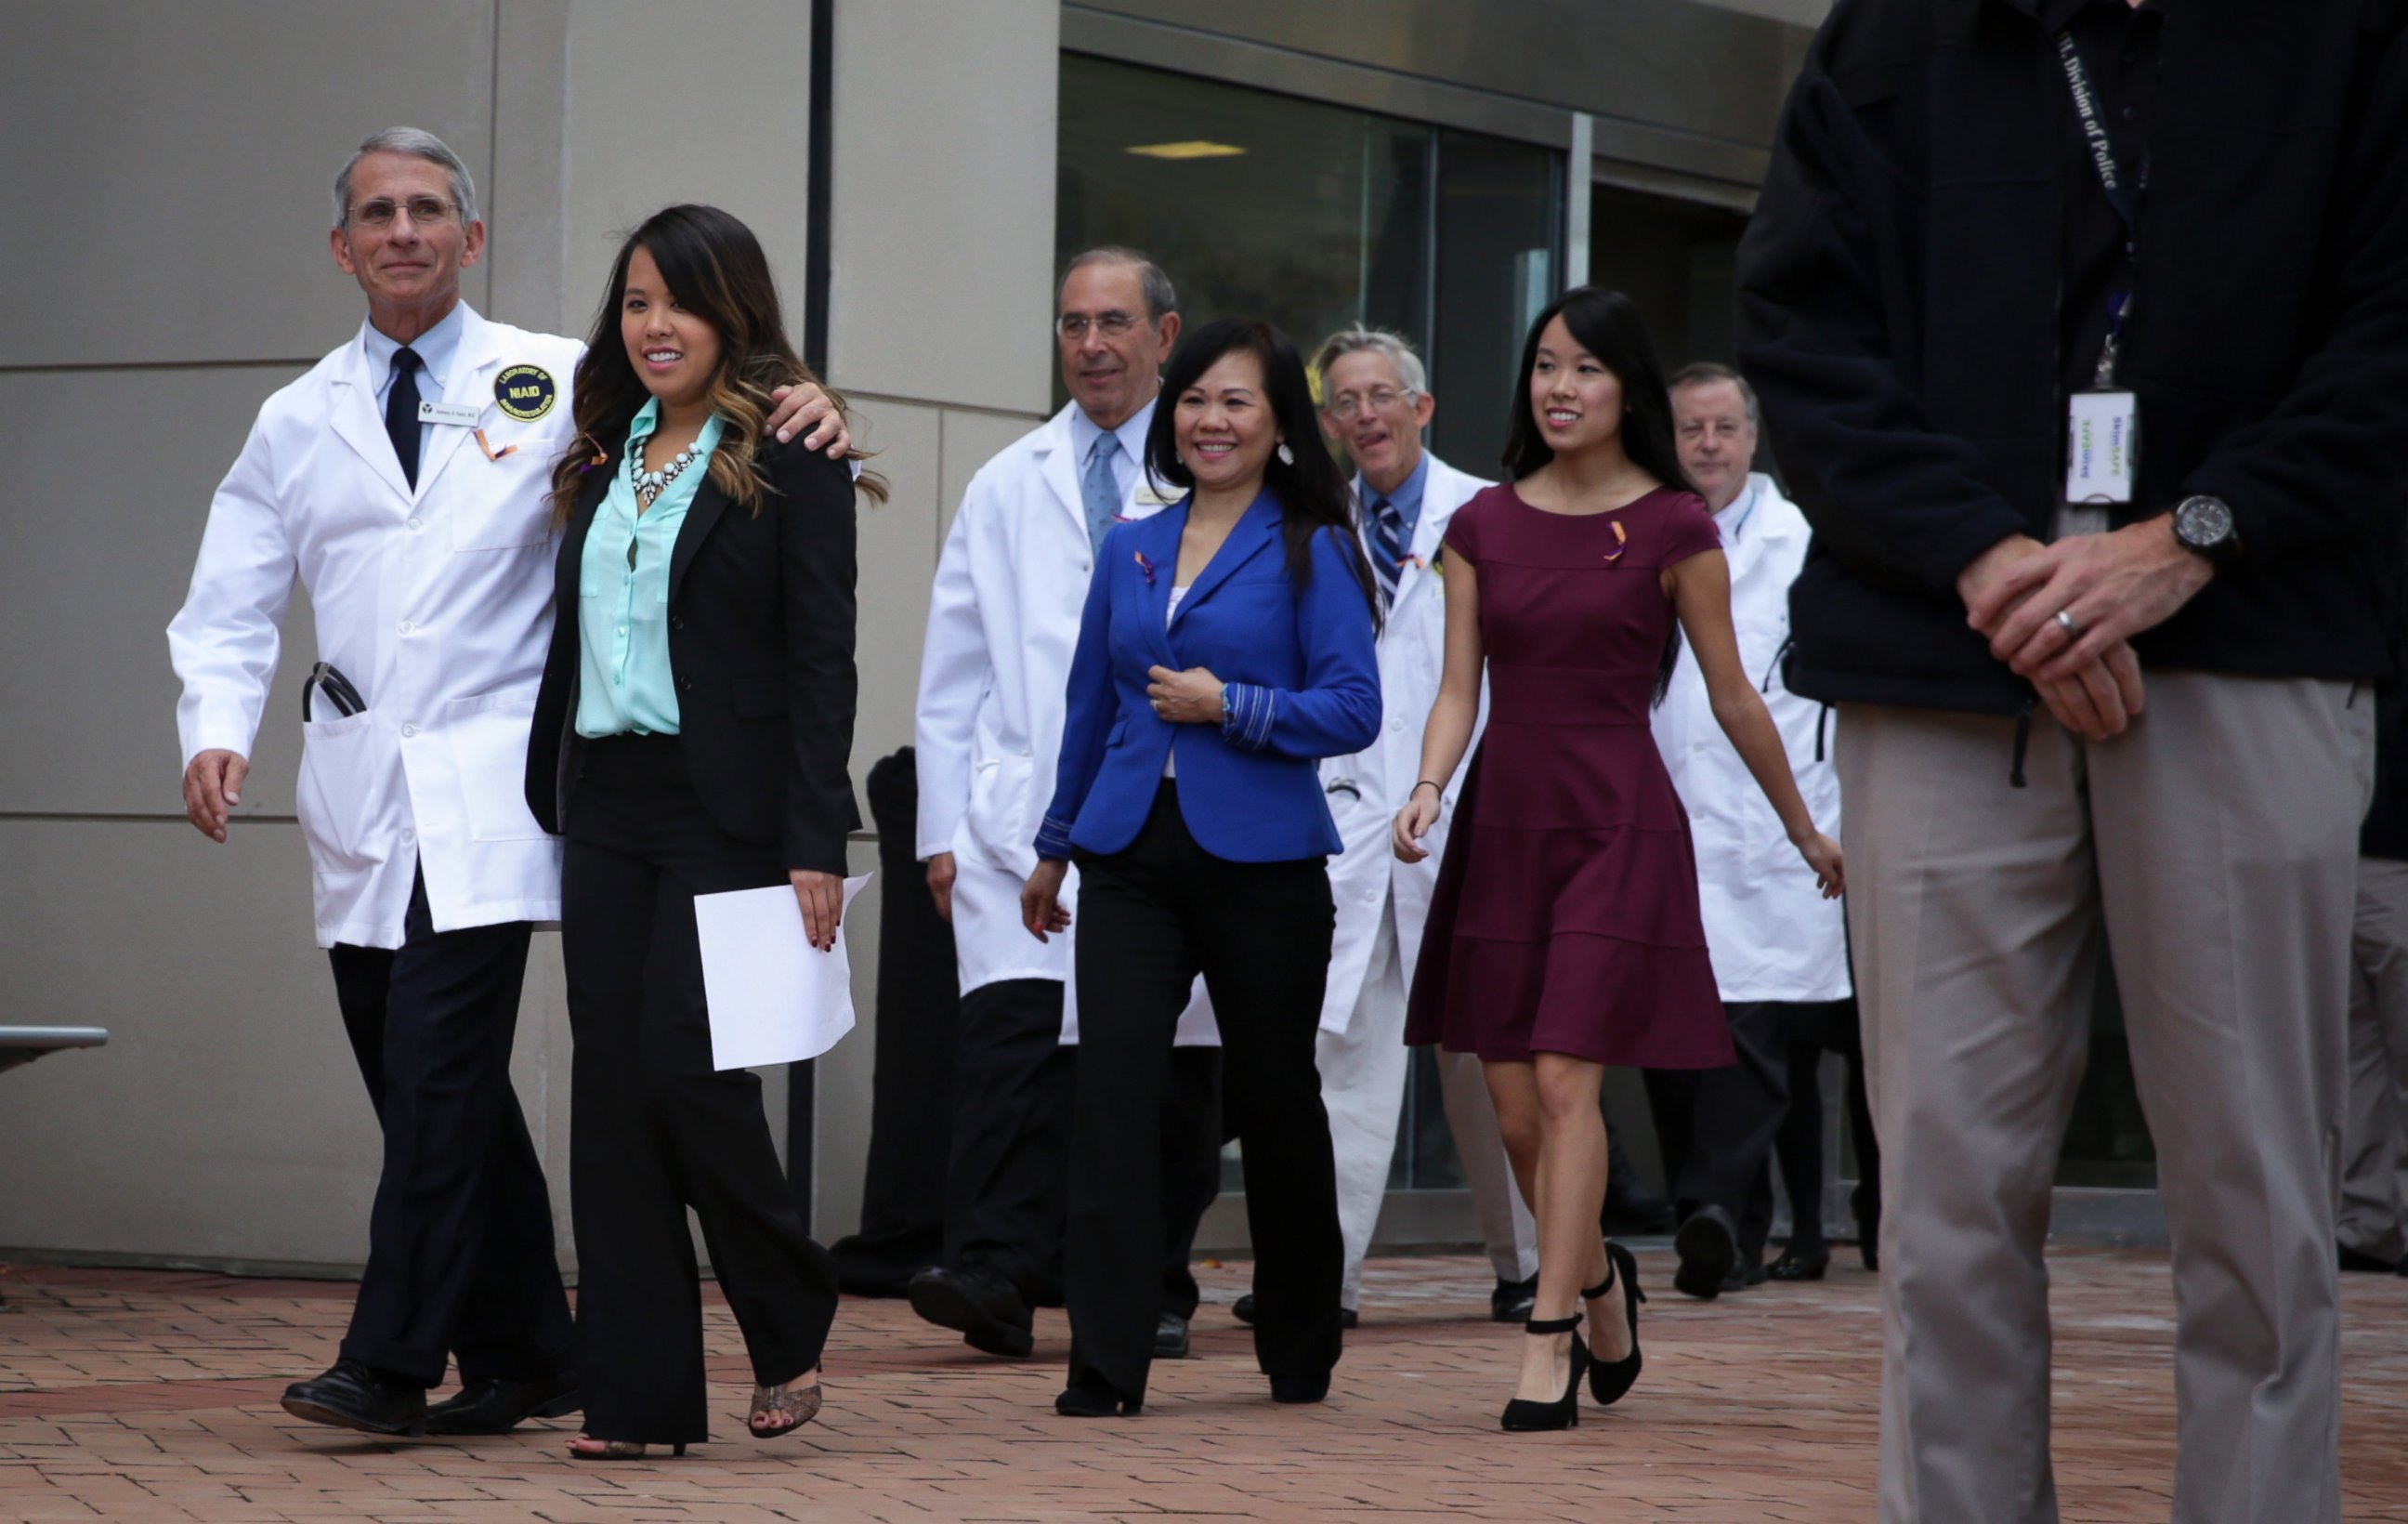 PHOTO: Director of the National Institute of Allergy and Infectious Diseases Anthony Fauci comes out of the building with Nina Pham for a news briefing at National Institutes of Health on Oct. 24, 2014 in Bethesda, Md.